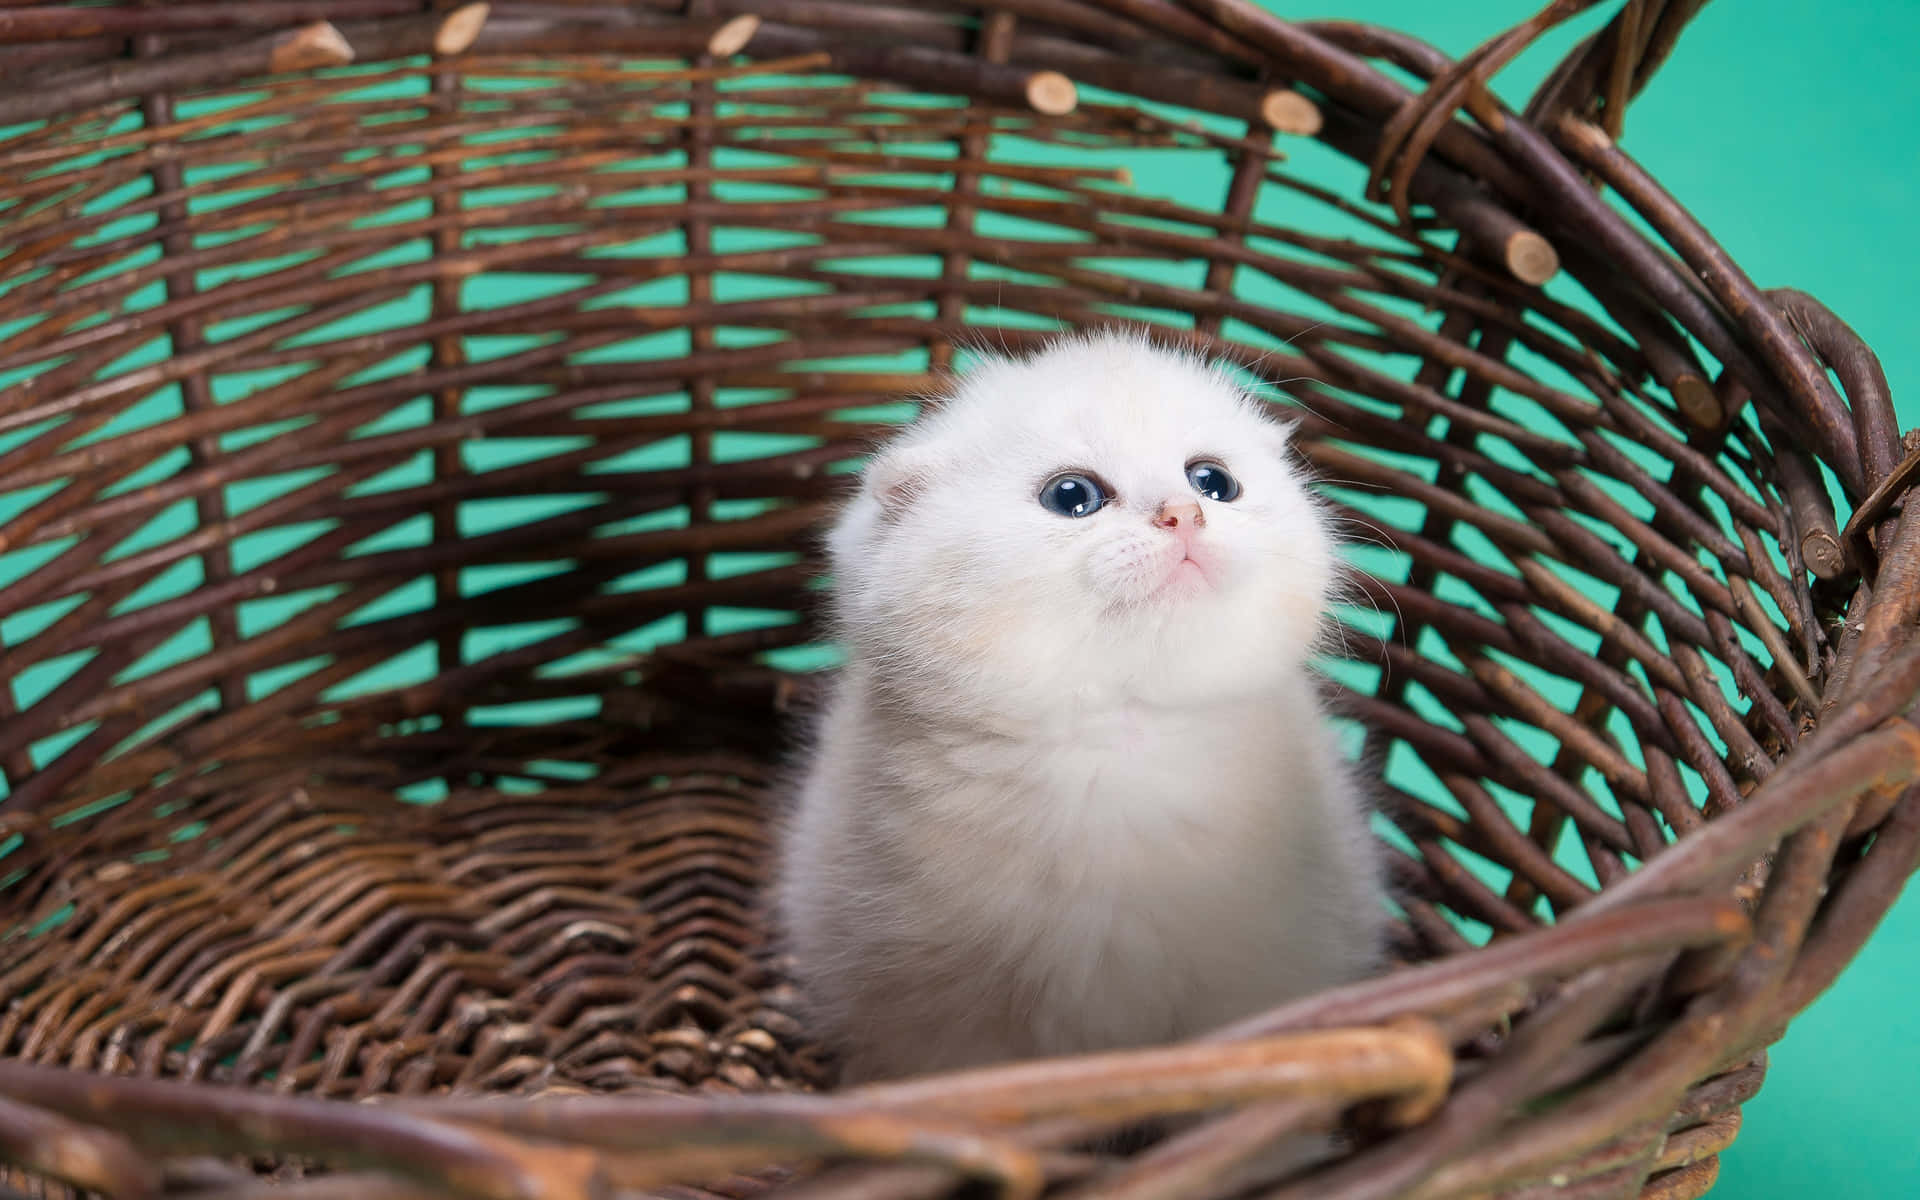 A beautiful fluffy kitten cat cuddles up for some playtime.